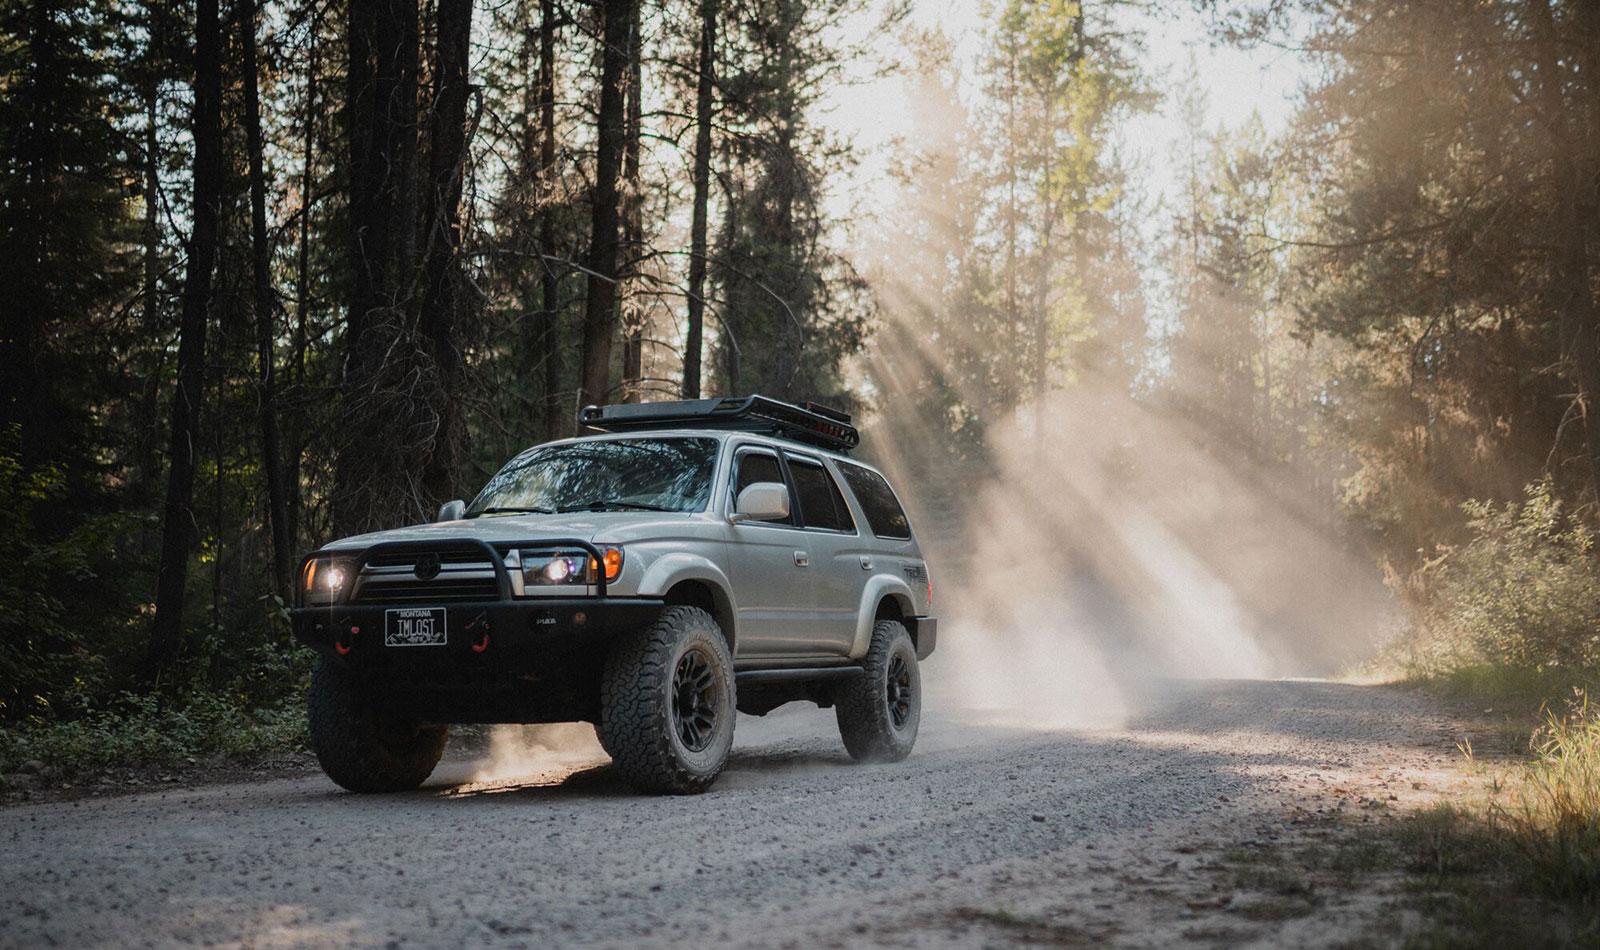 Toyota 4Runner 4x4 off road vehicle on a treelined trail 